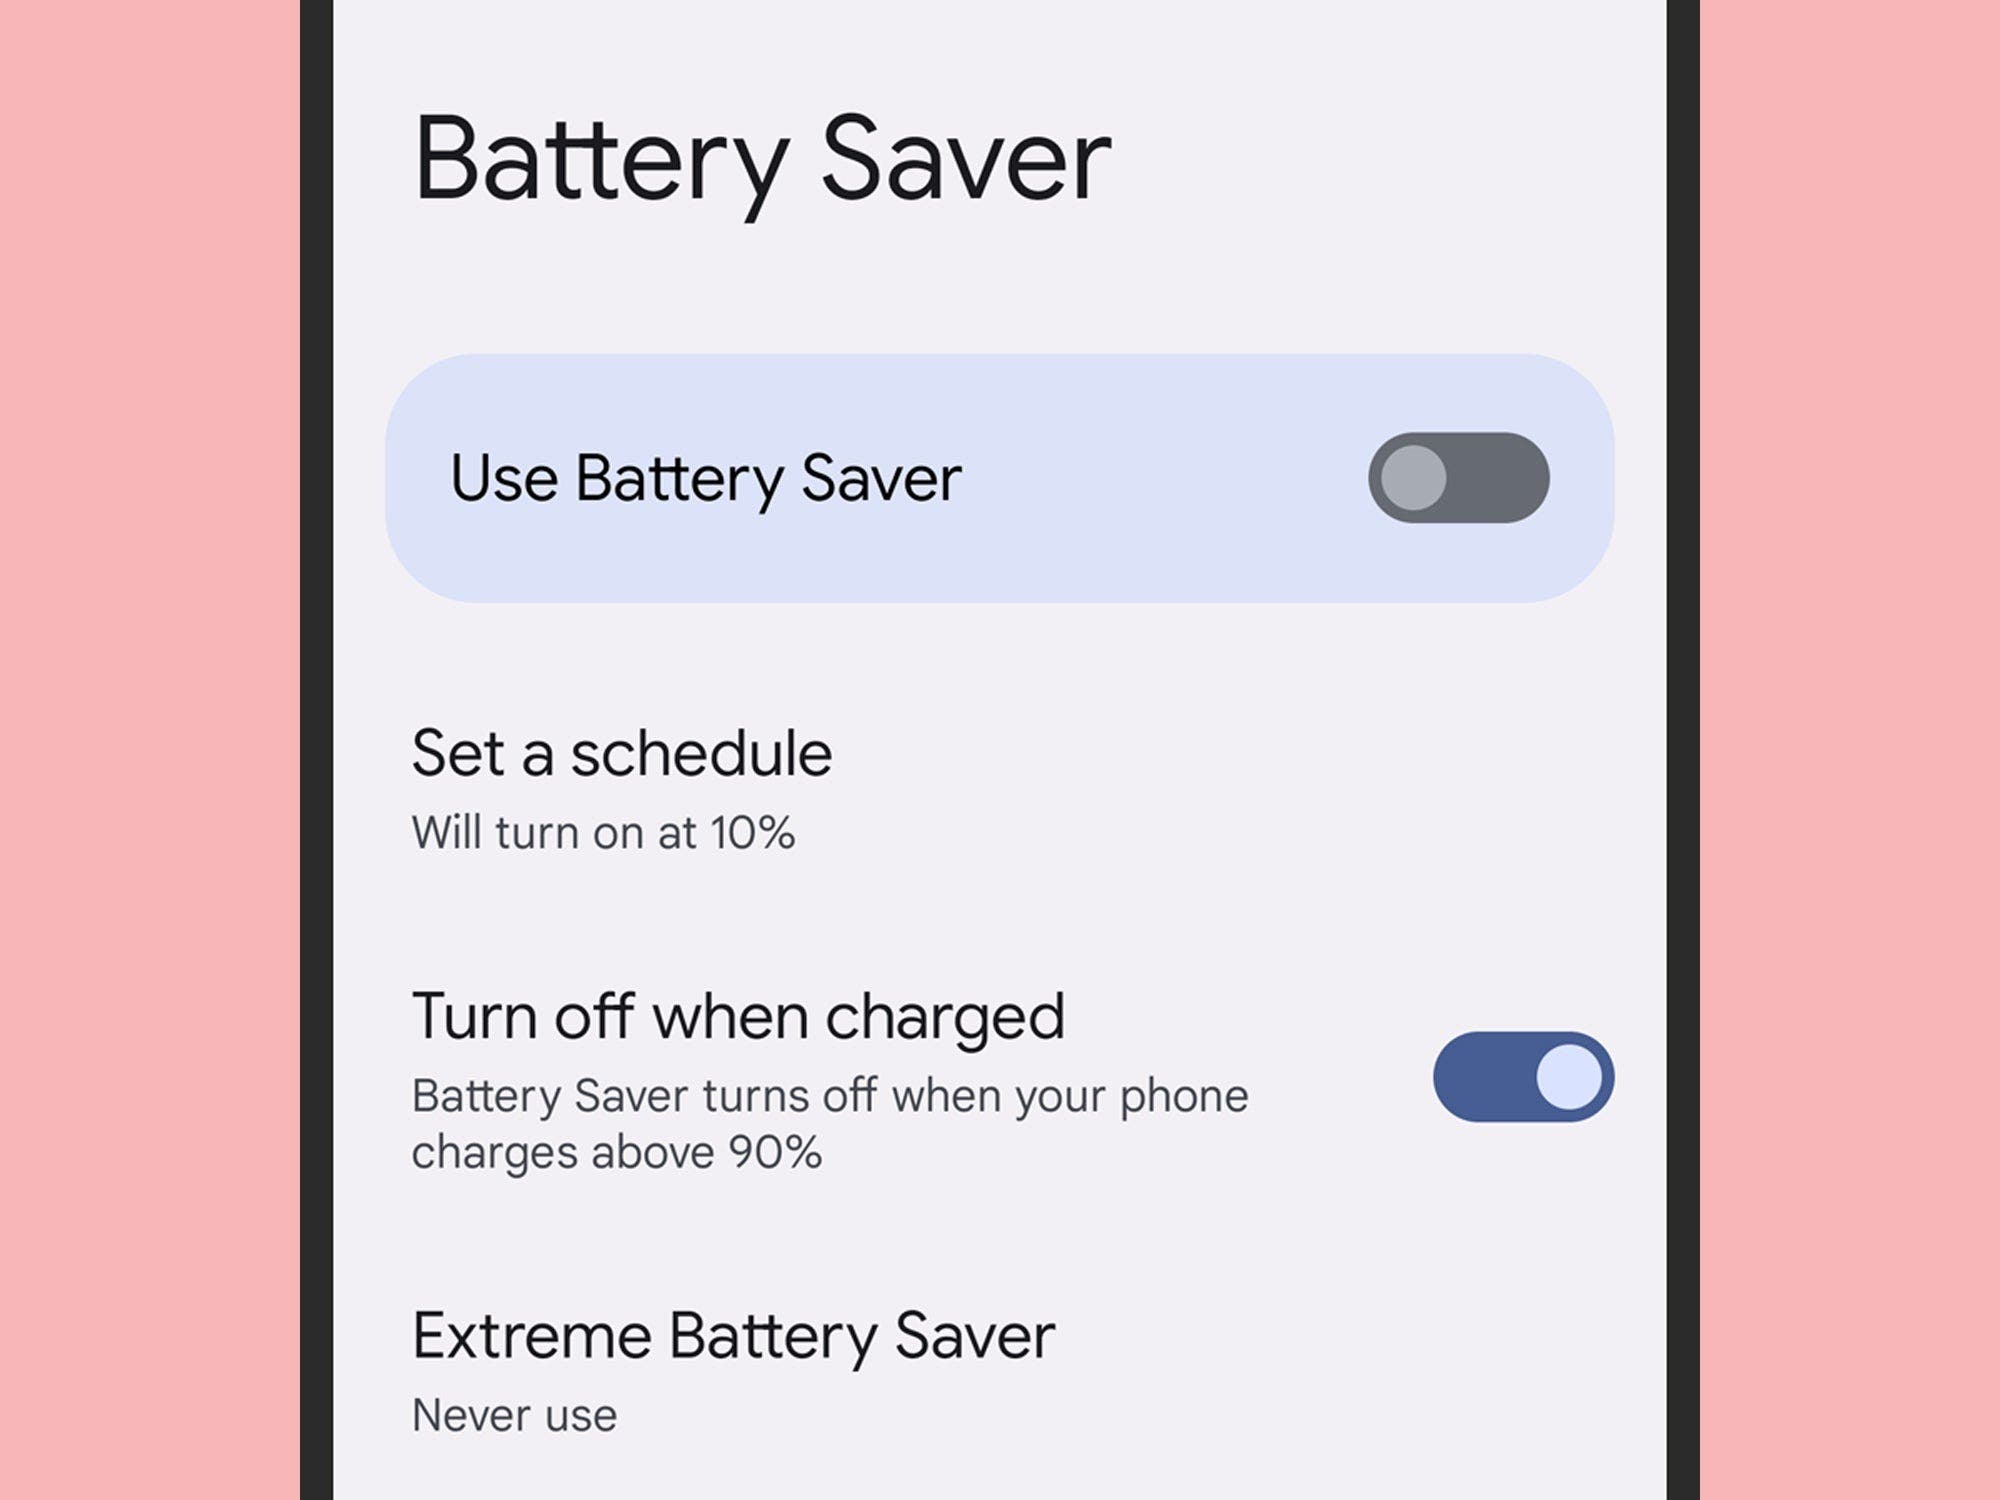 Extreme Battery Saver